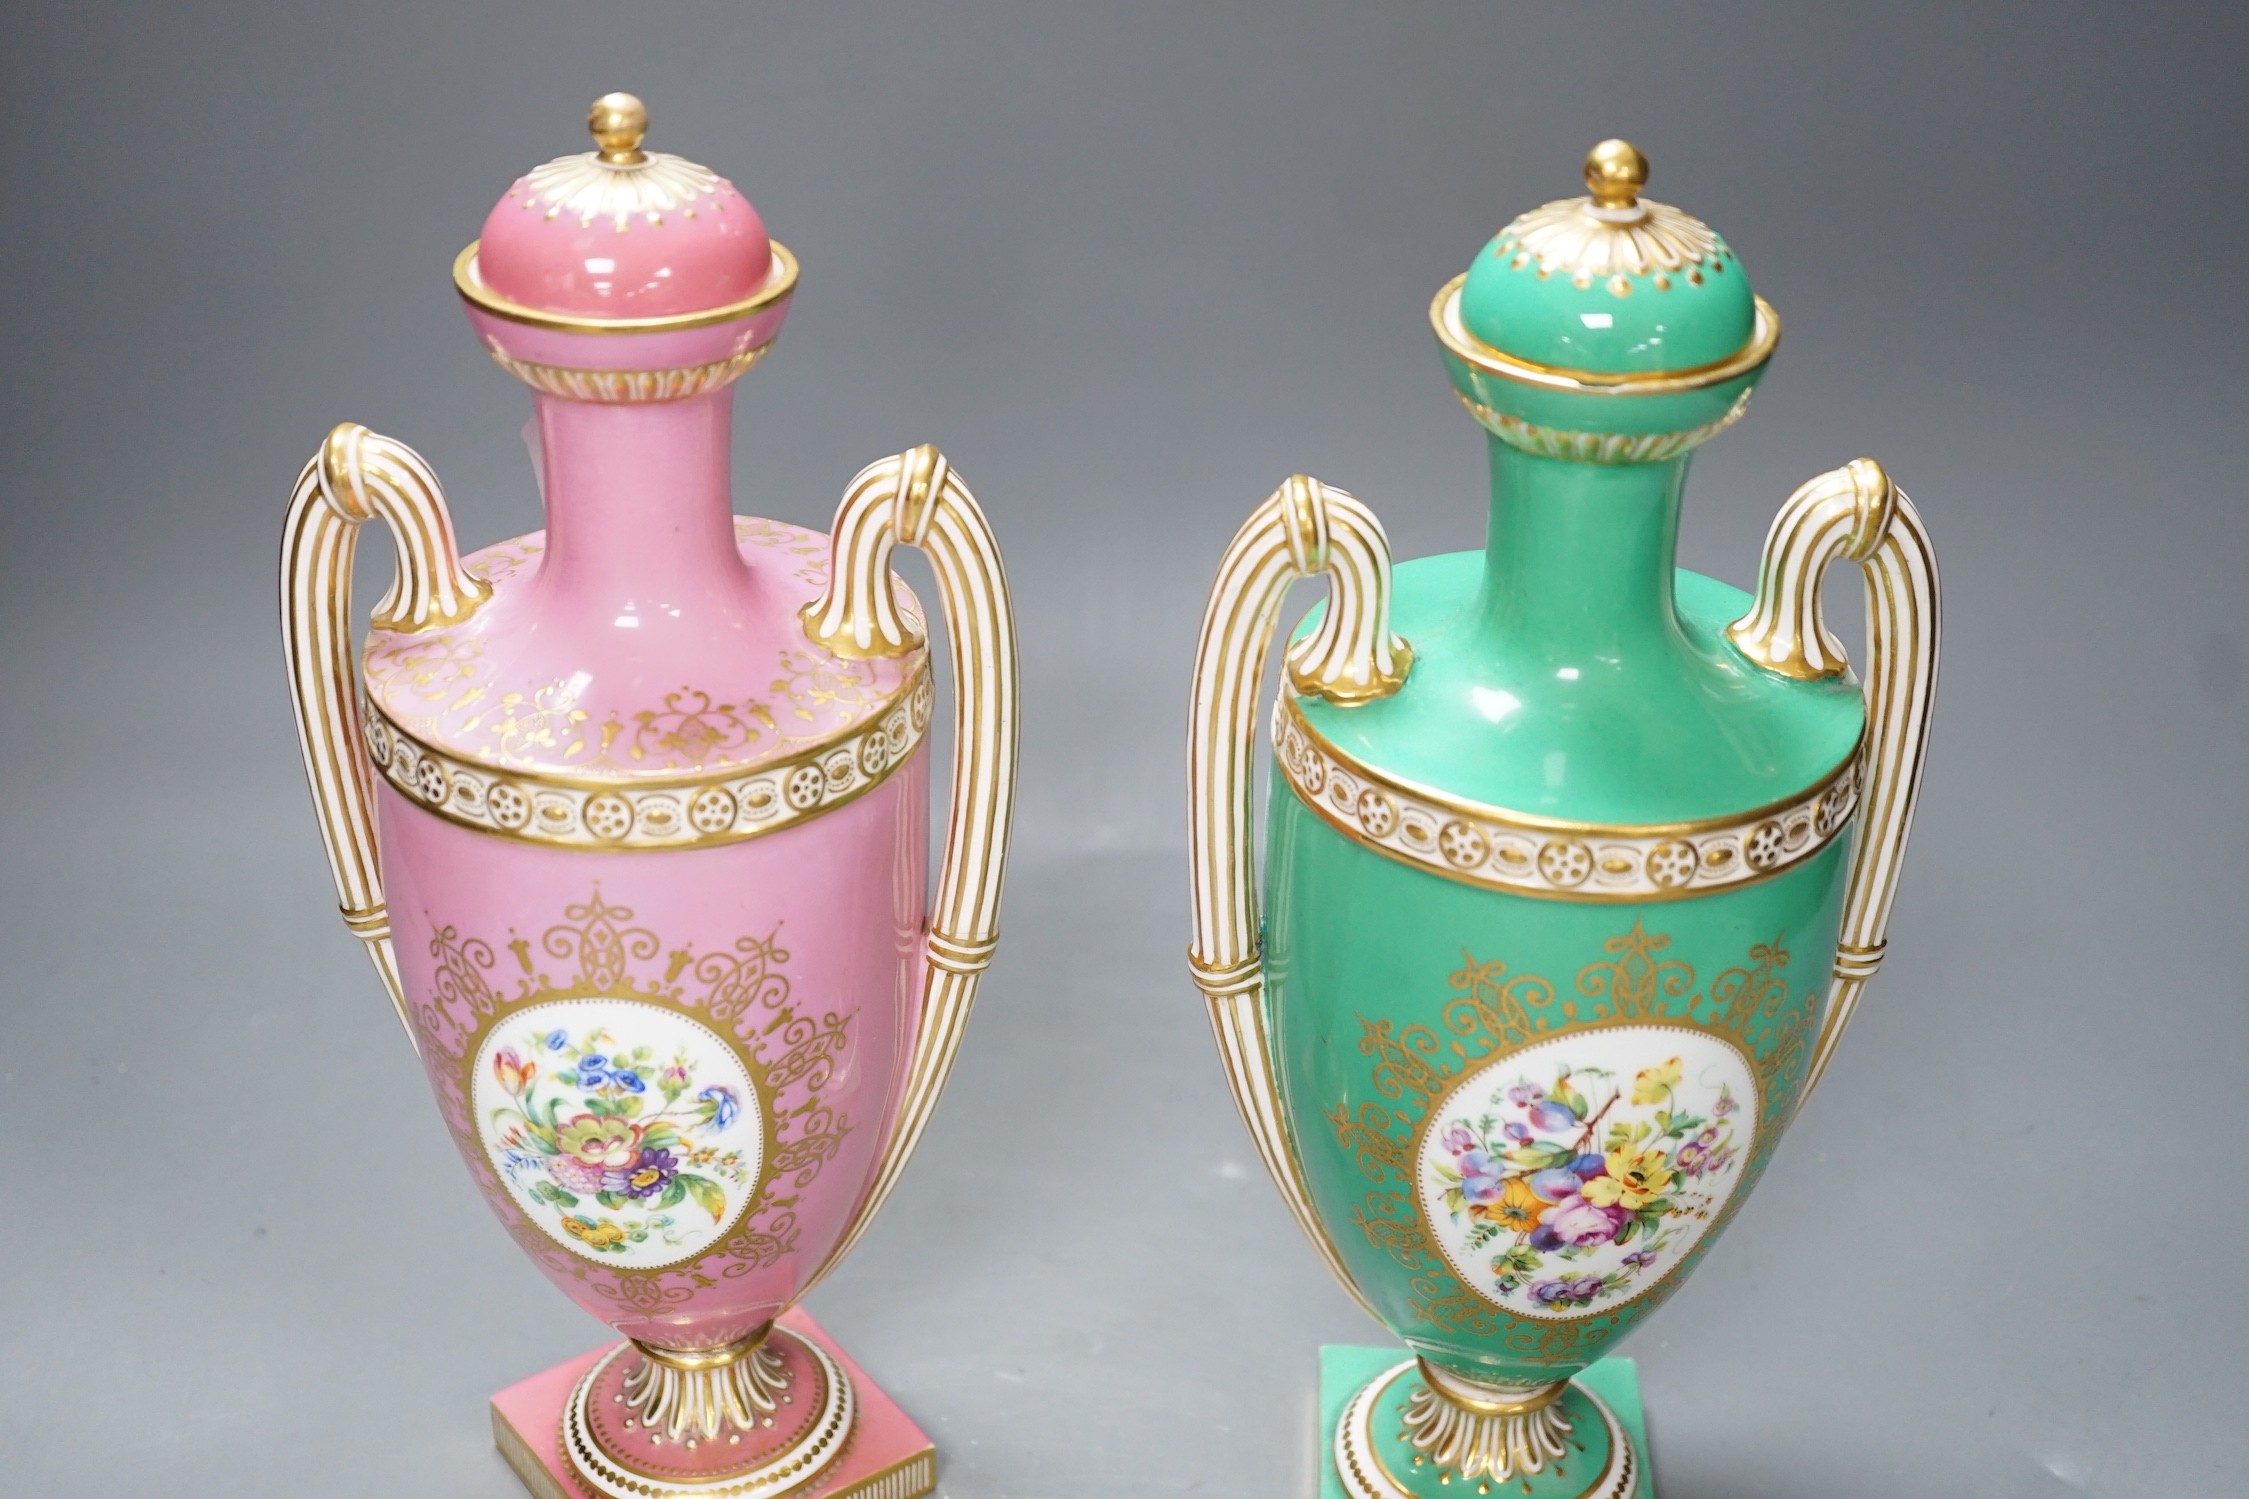 A pair of Coalport Coalbrookdale two handled vases with central oval panelled floral painting and gilt decoration, one green and the other pink, 29cm high